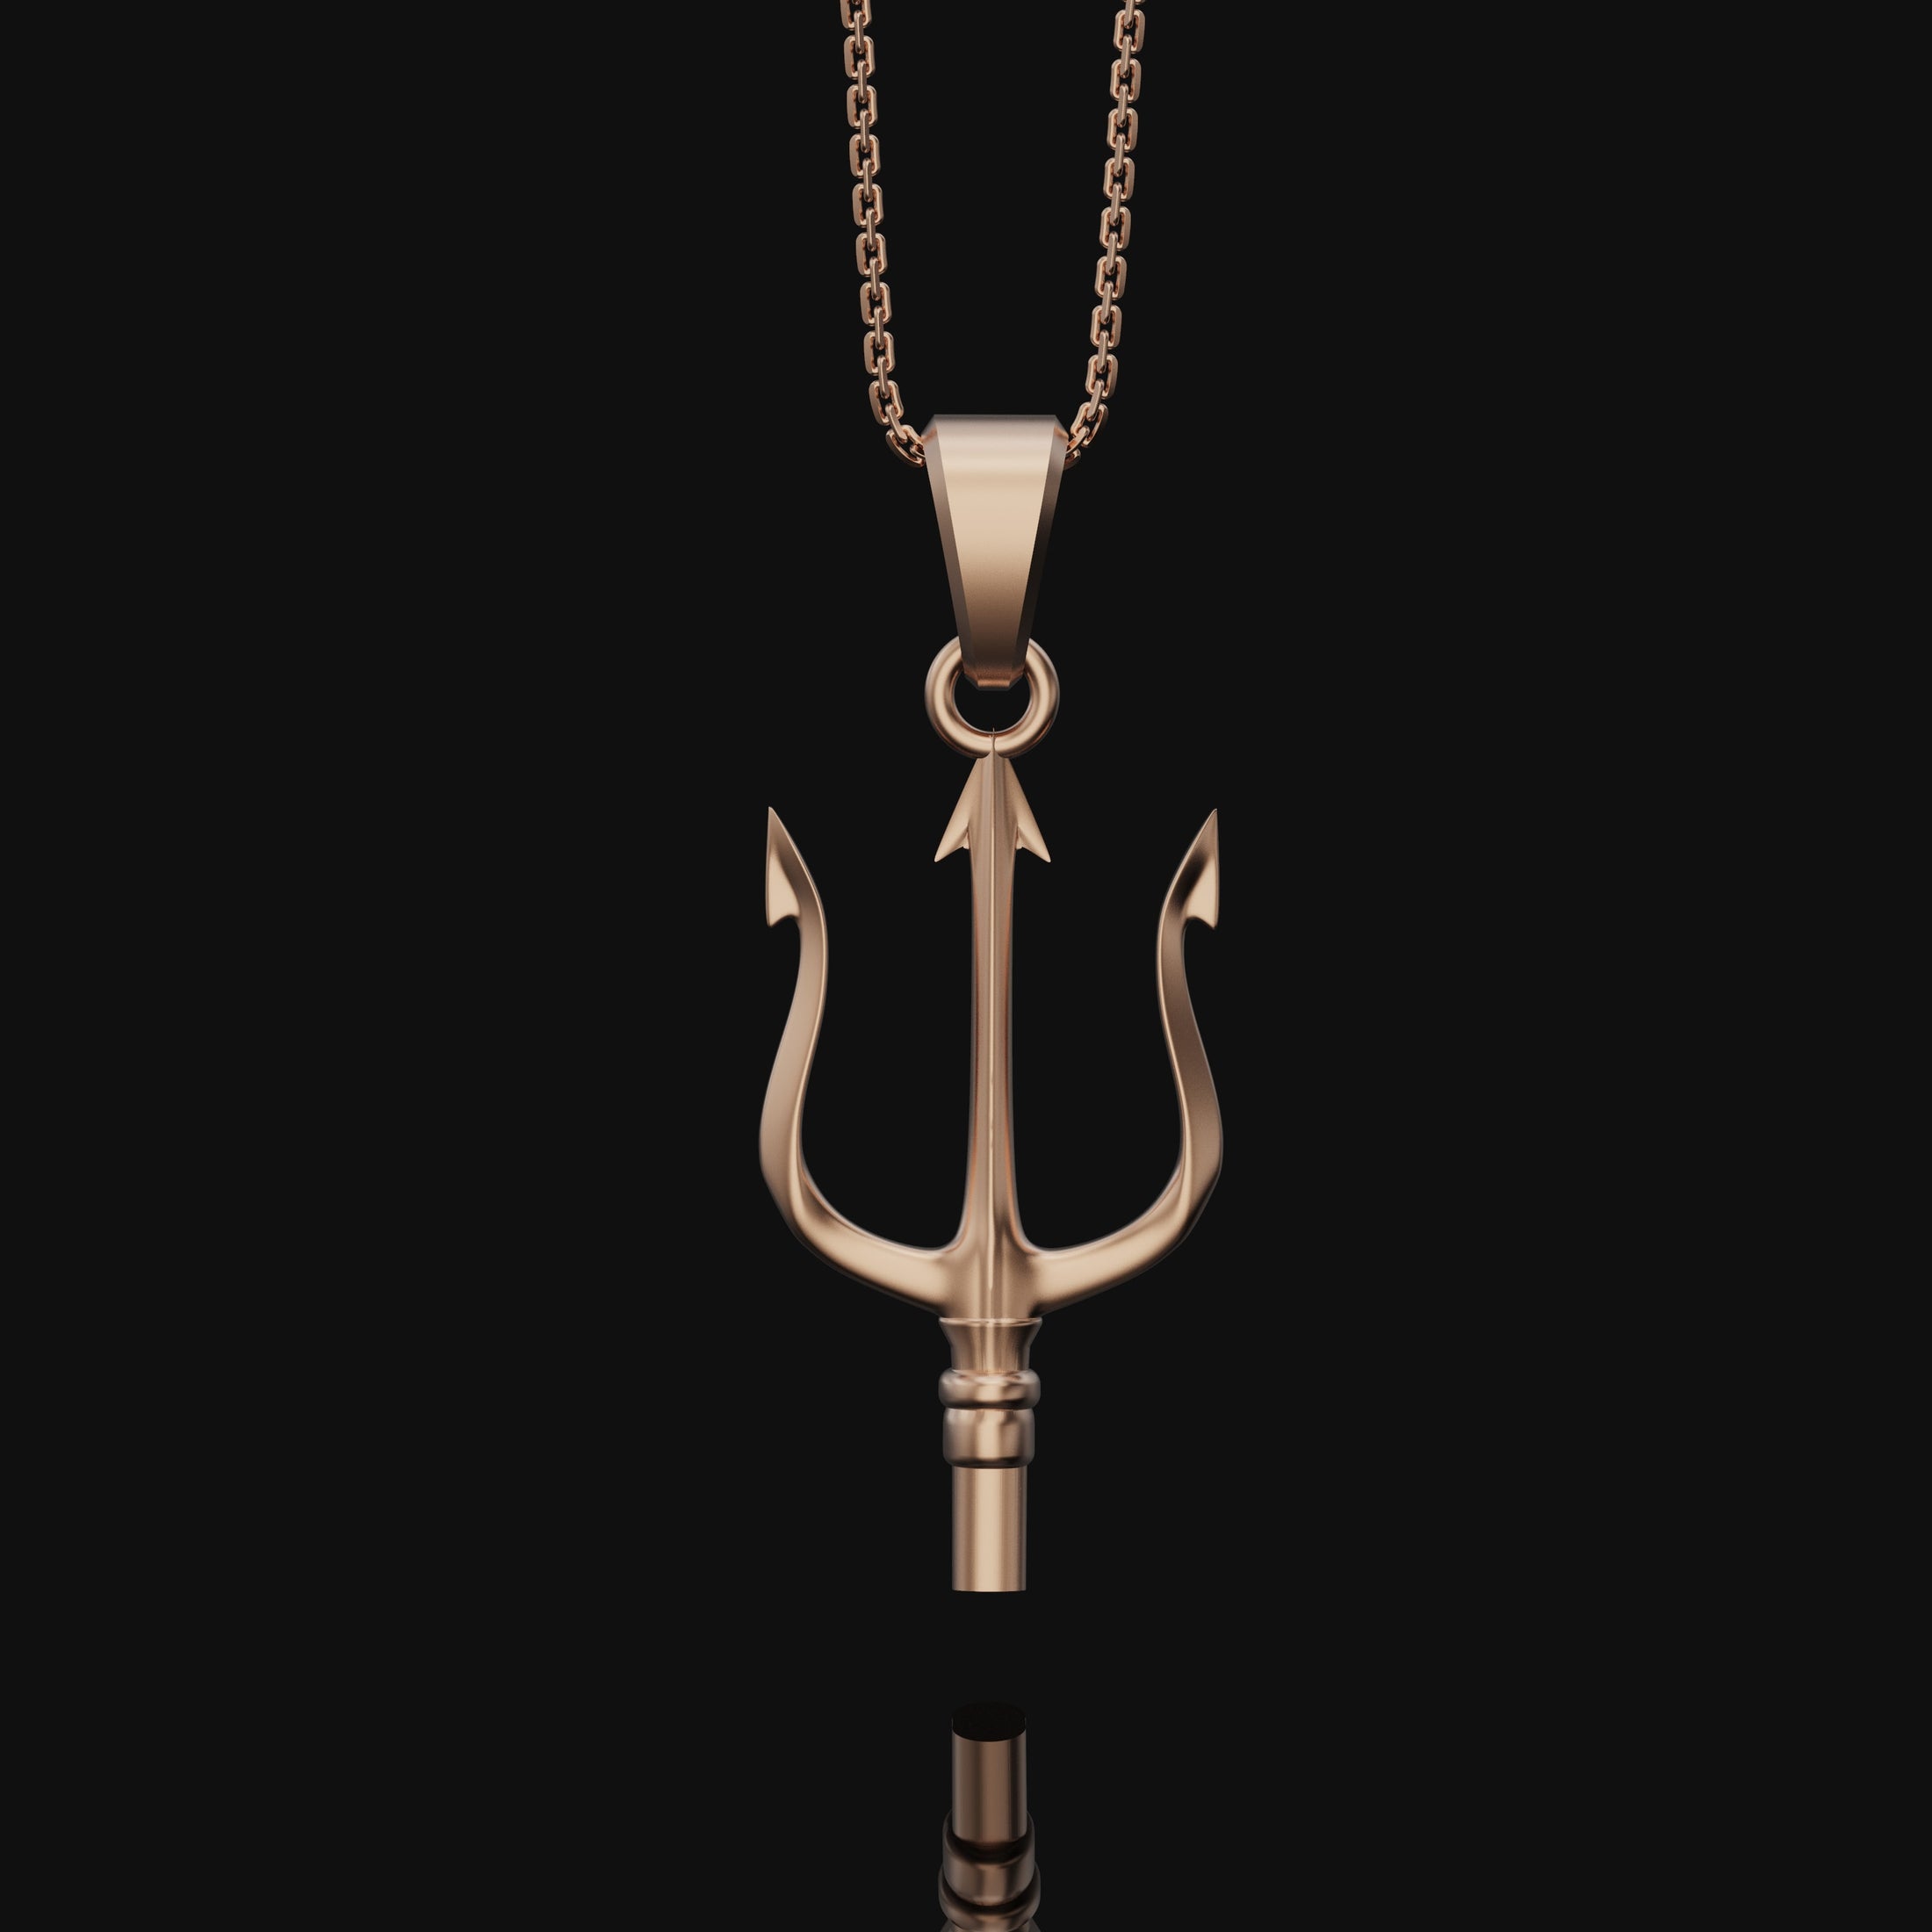 Sterling Silver Trident Necklace, Poseidon's Trident Pendant, White Gold Plated, Yellow Gold Plated, Rose Gold Plated, Birthday Gift Jewelry Rose Gold Finish